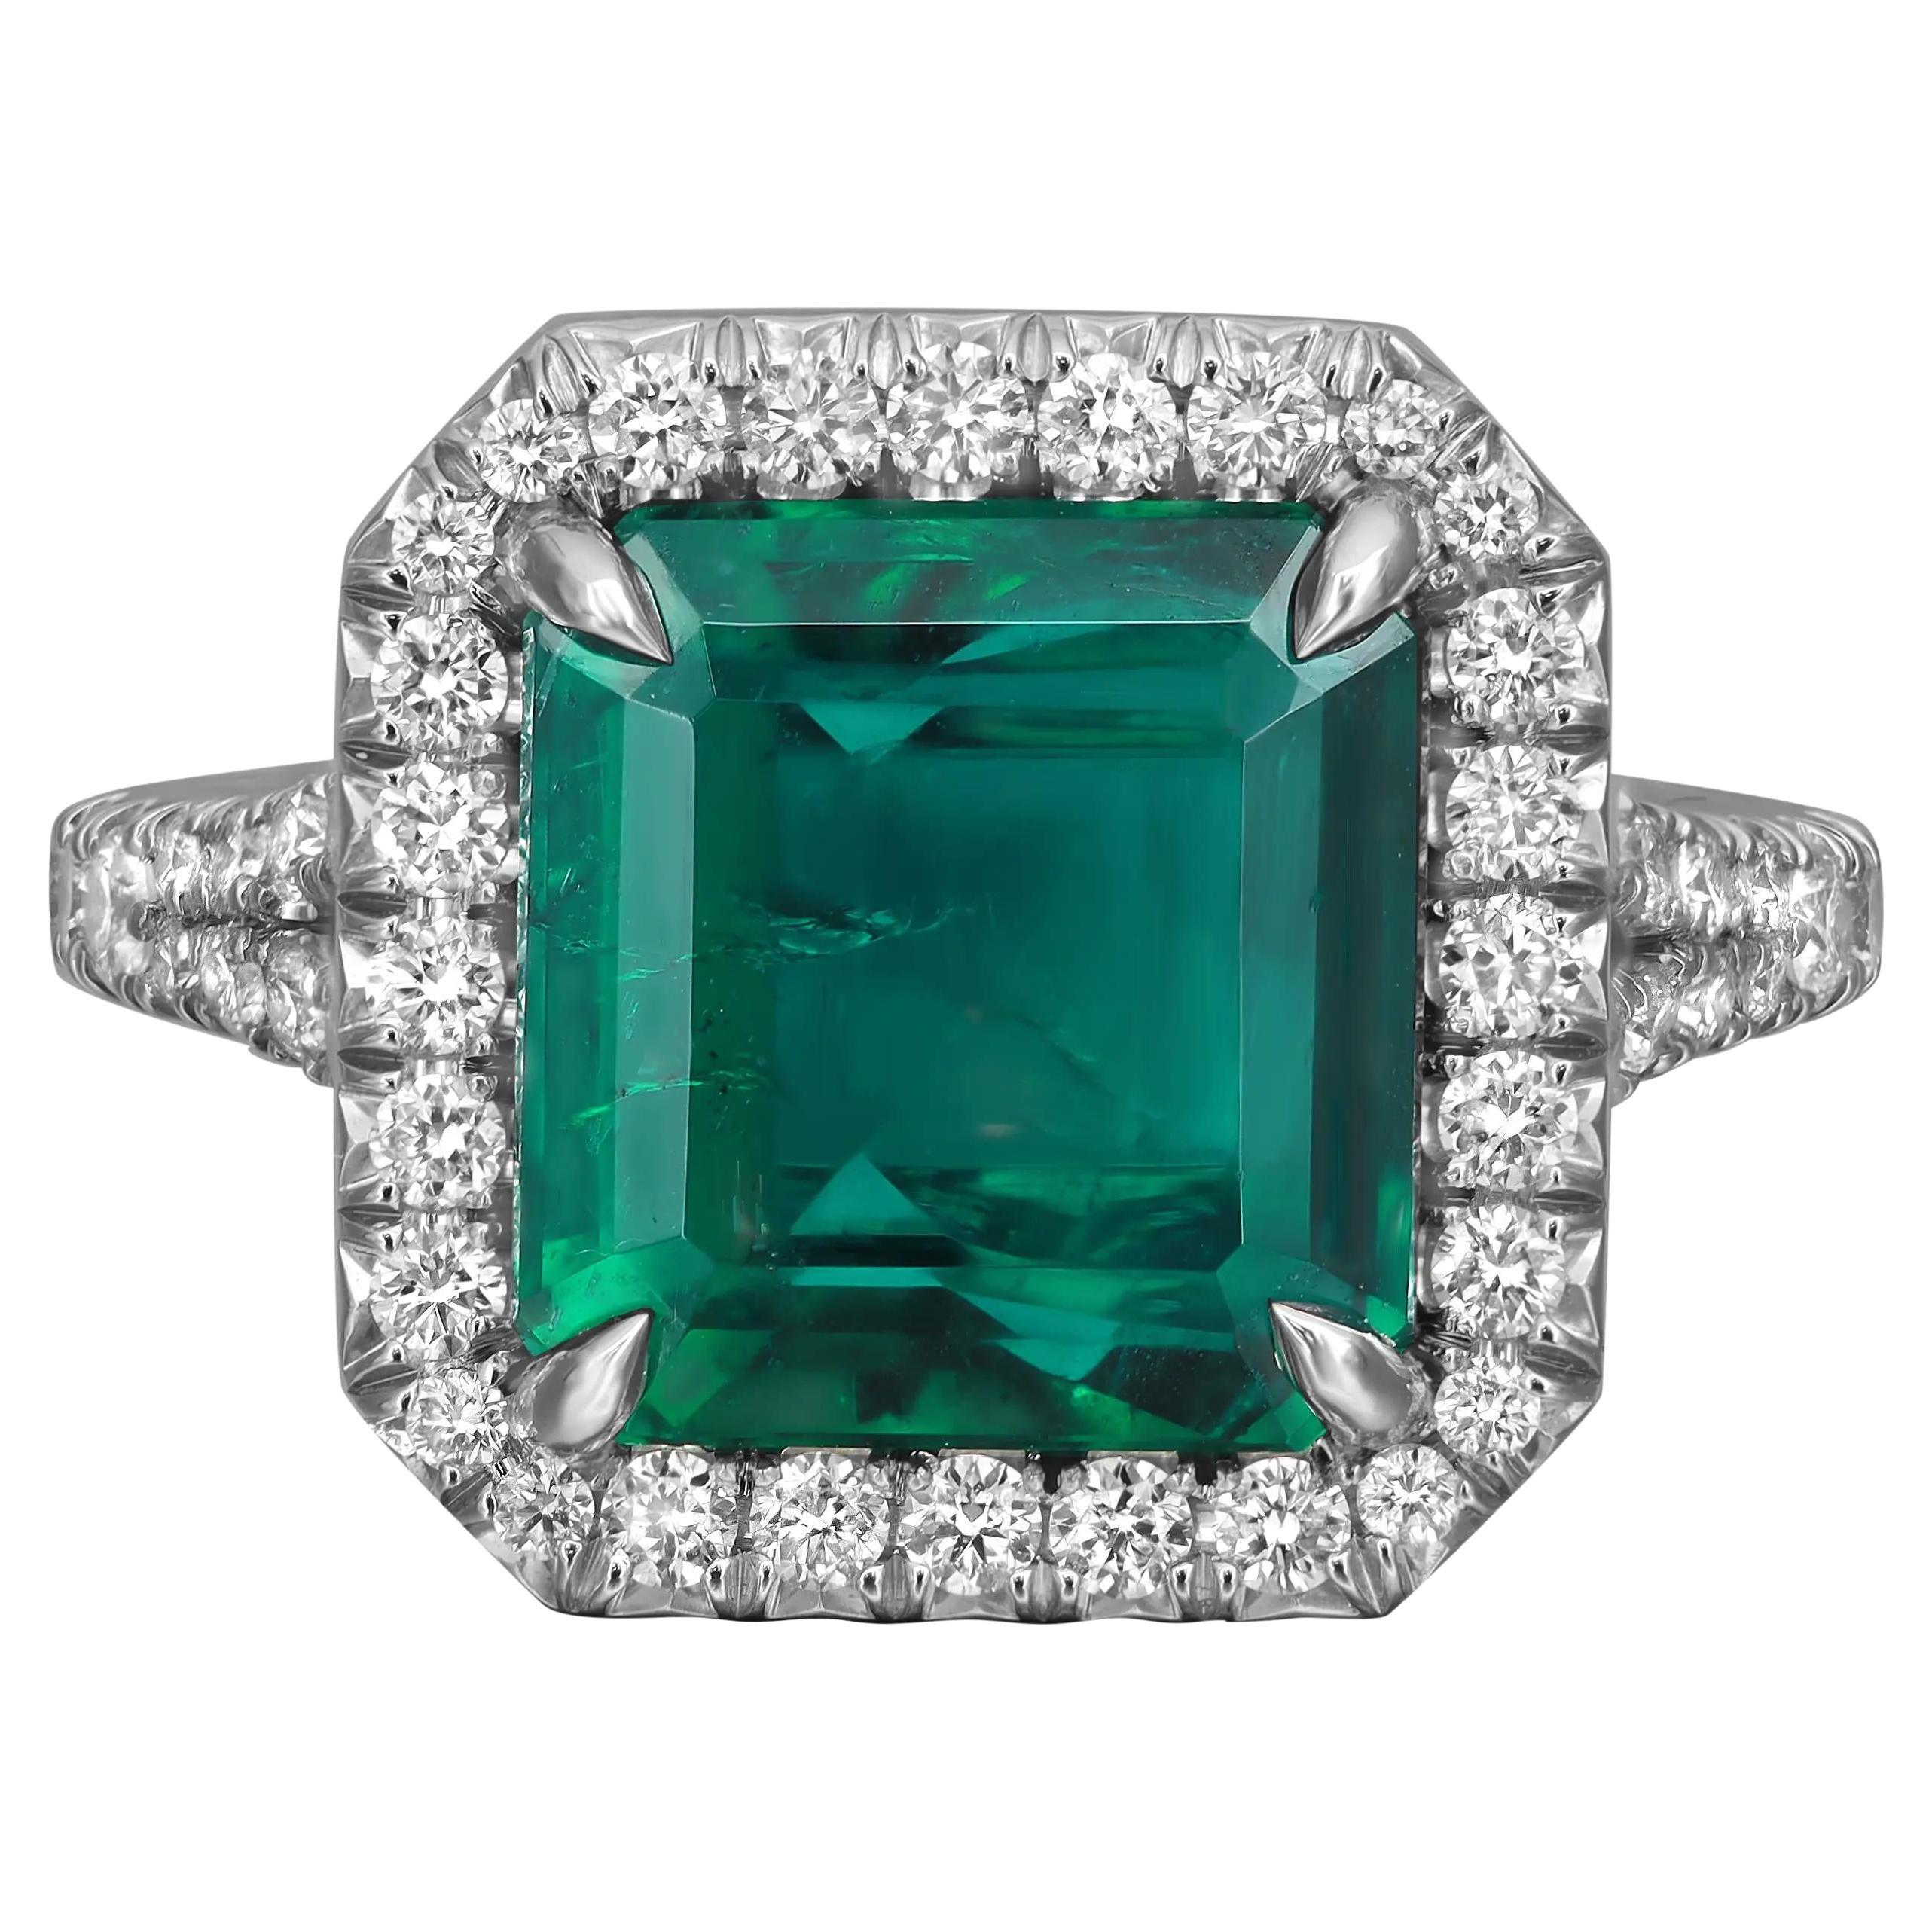 3.57cts Octagonal Zambian Green Emerald & Diamond Engagement Ring Platinum GIA For Sale